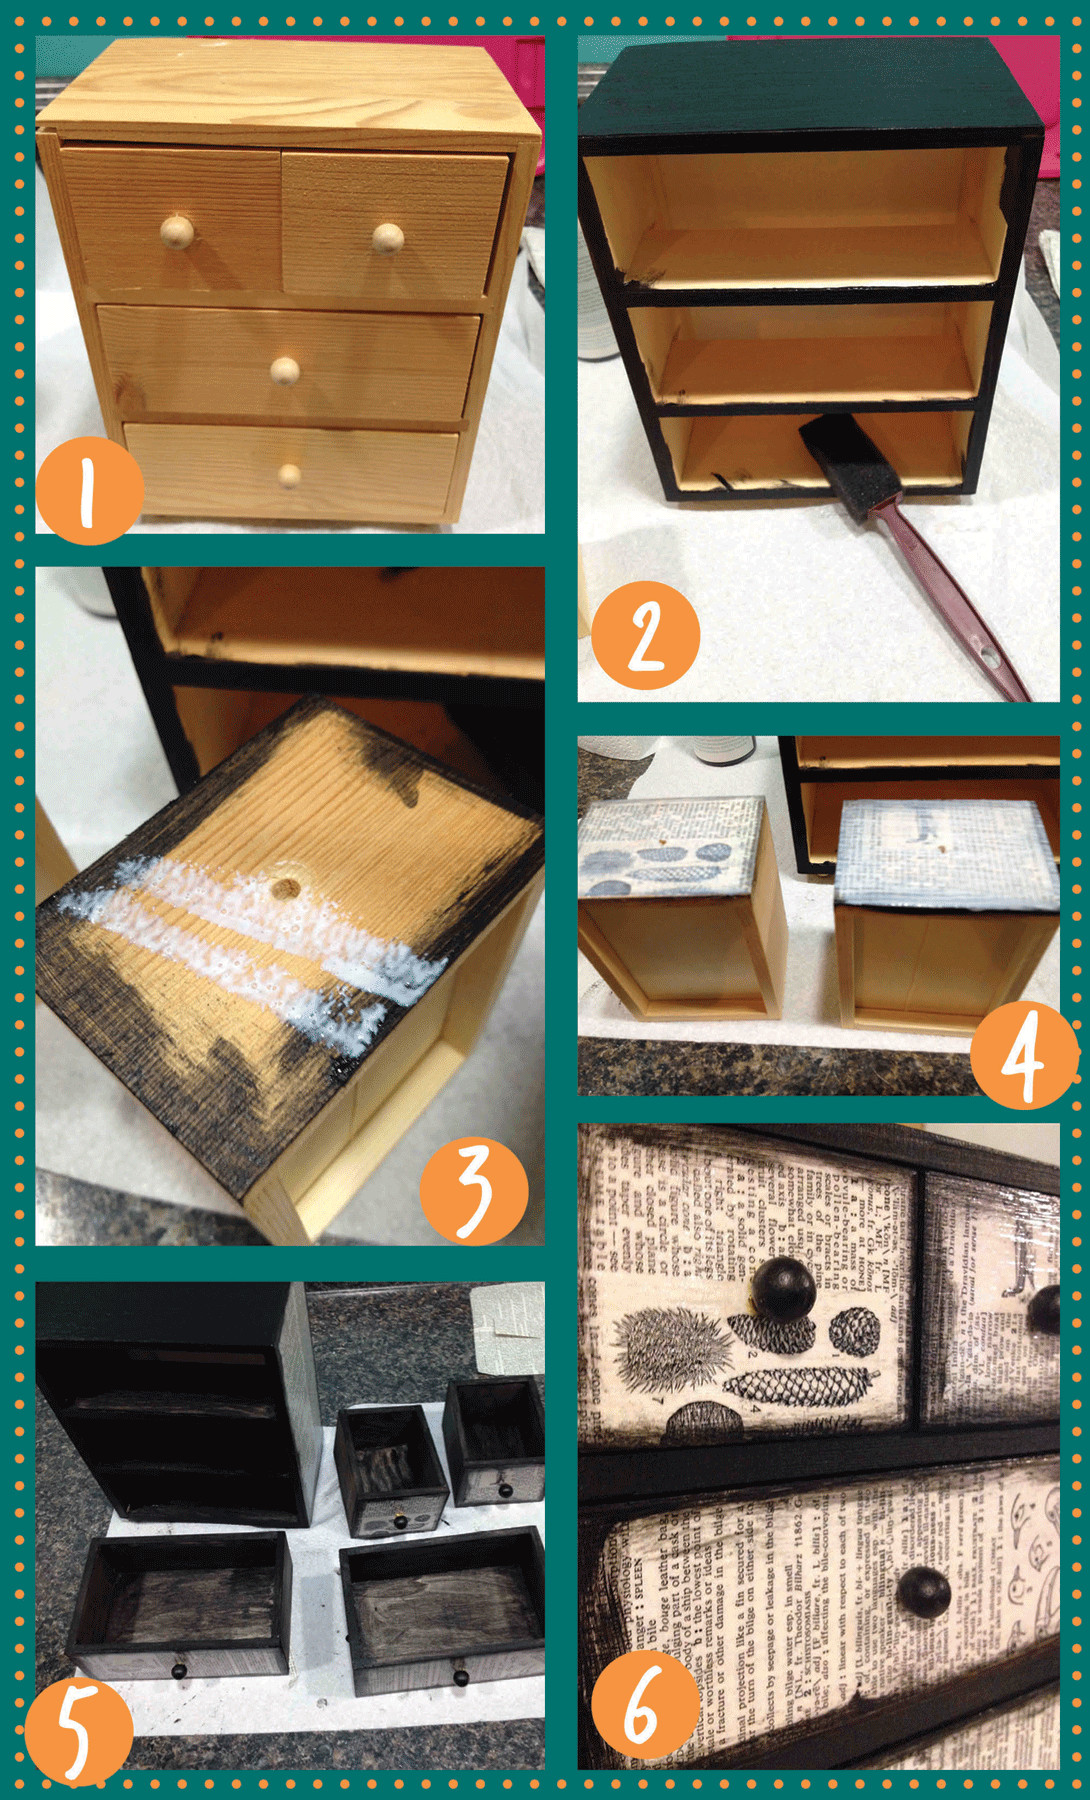 DIY Wooden Box Mod
 Mod Podge Jewelry Box – A Smith of All Trades